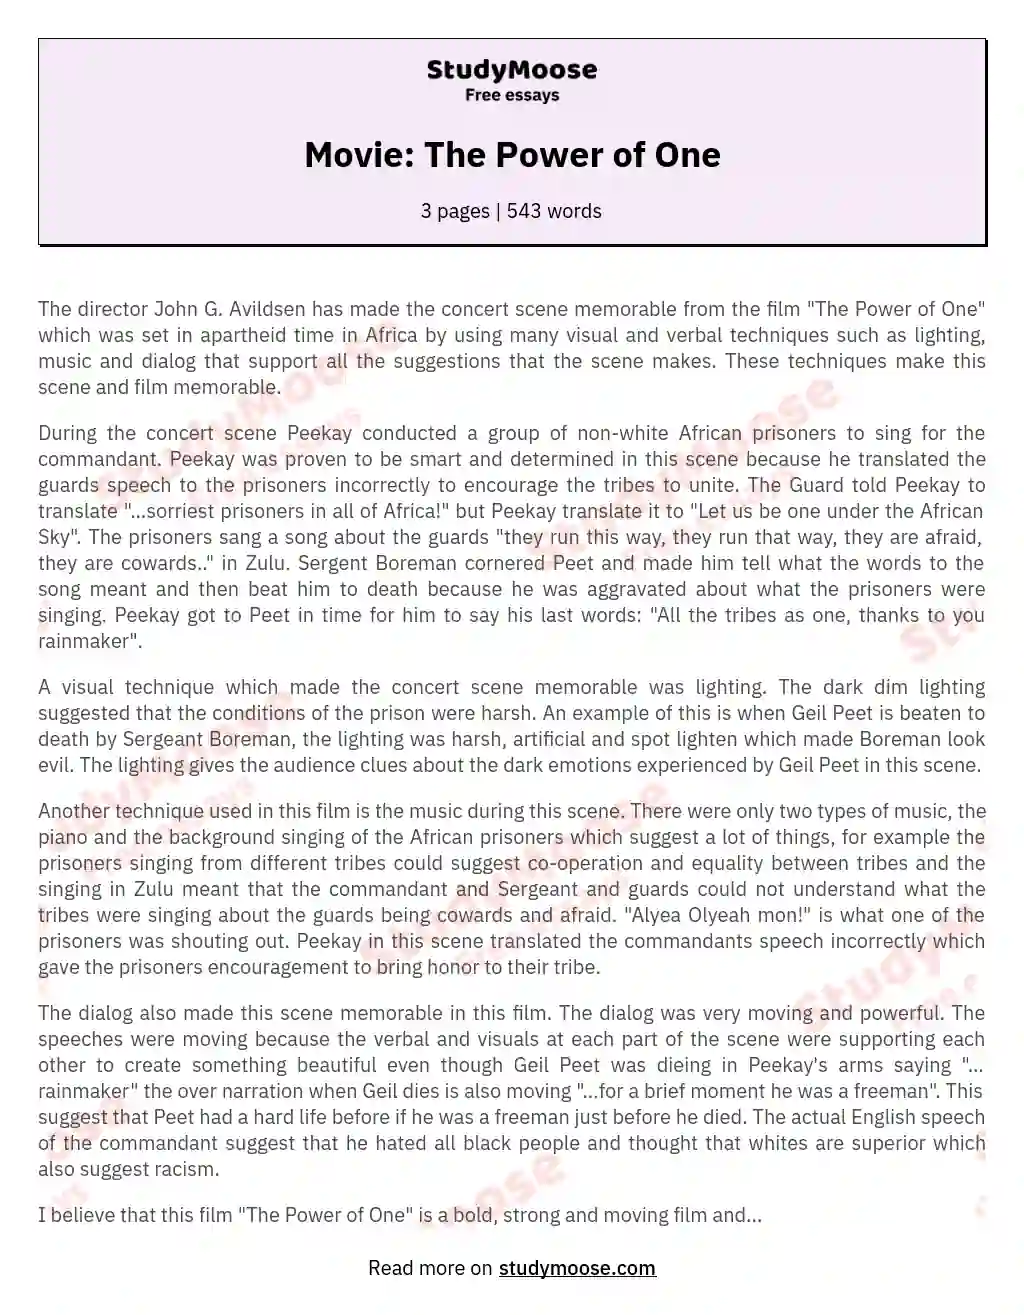 Movie: The Power of One essay